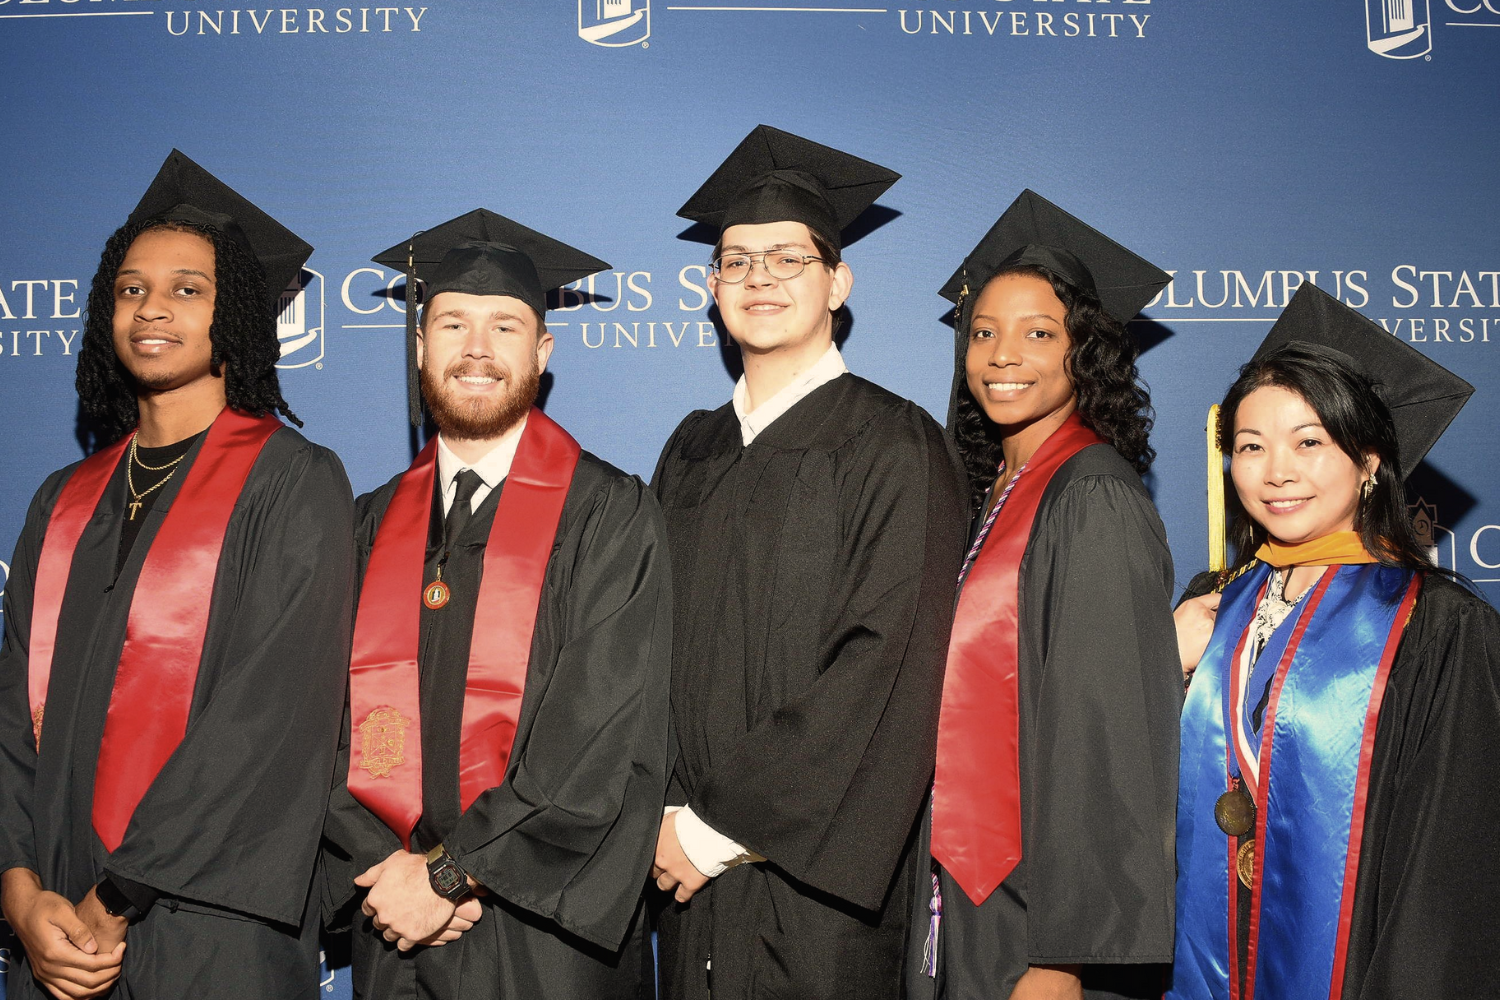 Group of graduates standing in front of a blue backdrop